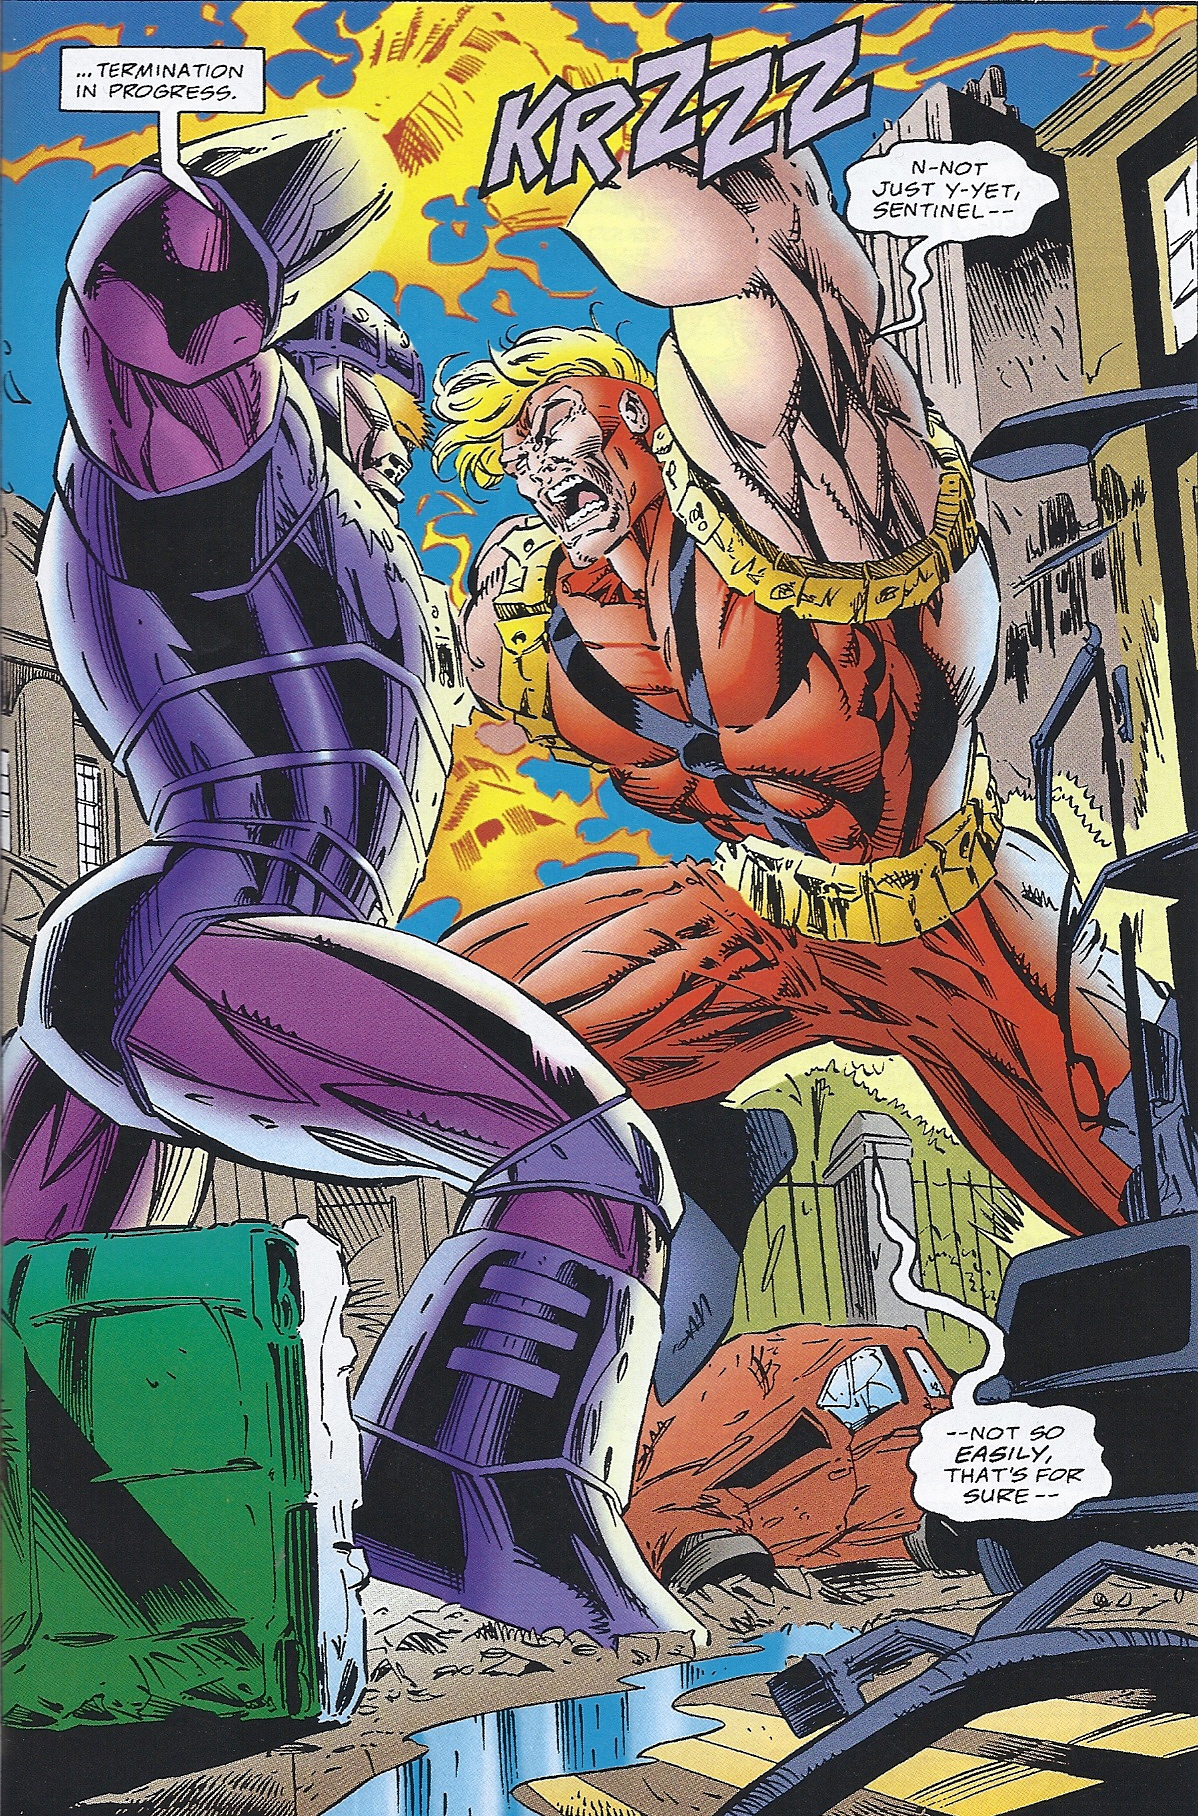 Hank Pym as the Giant Man